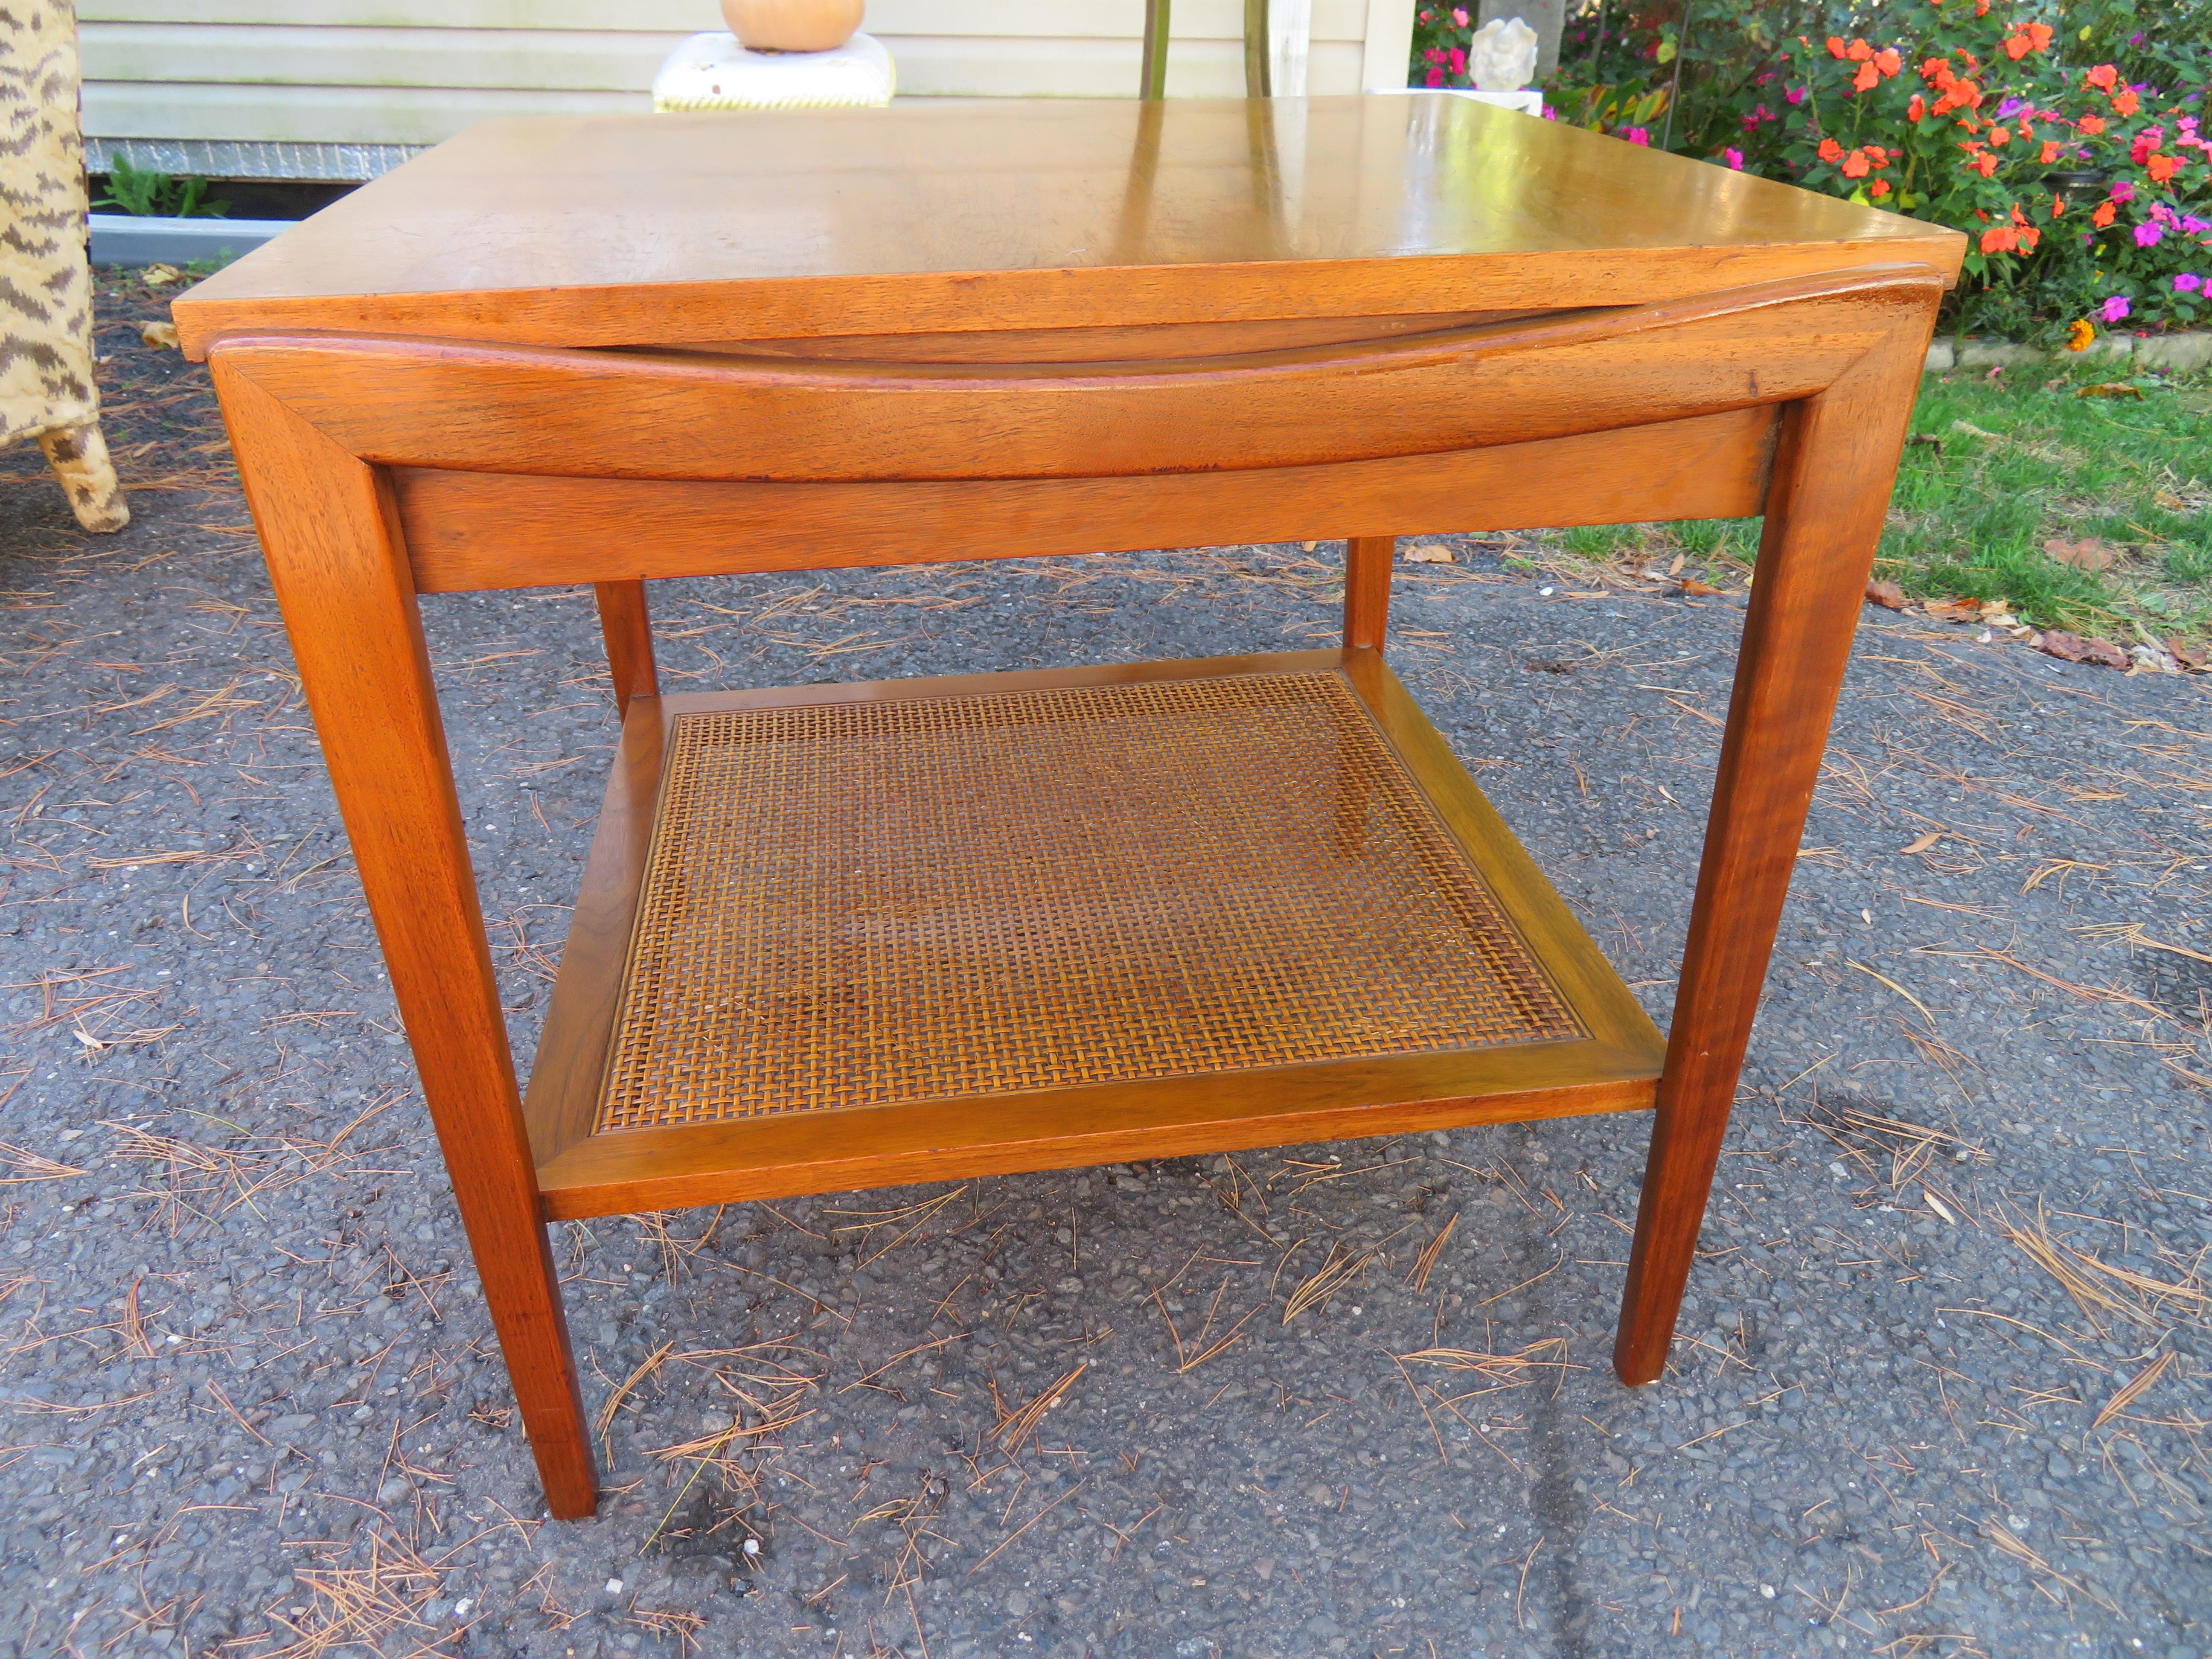 Lovely Widdicomb Walnut & Cane Single Drawer End Table Mid-Century Modern In Good Condition For Sale In Pemberton, NJ